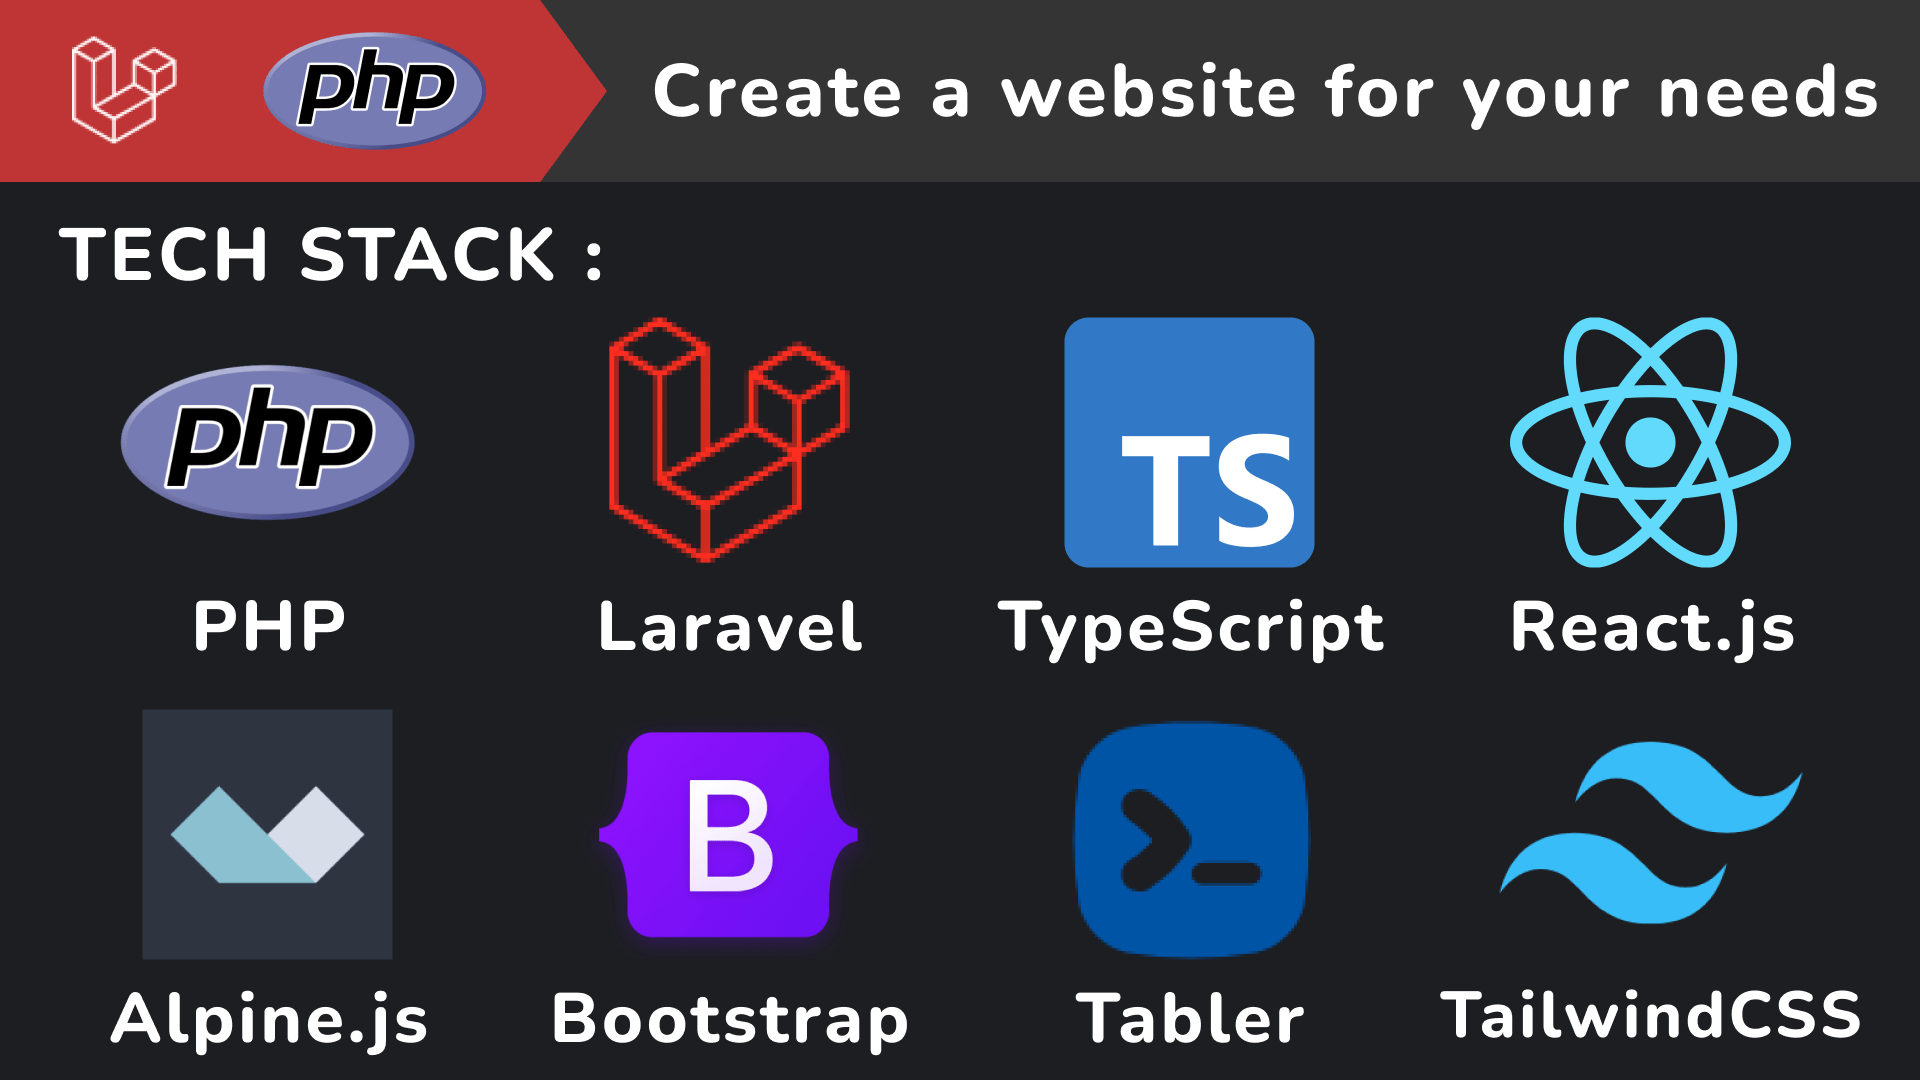 I will create a website for your needs using PHP and Laravel